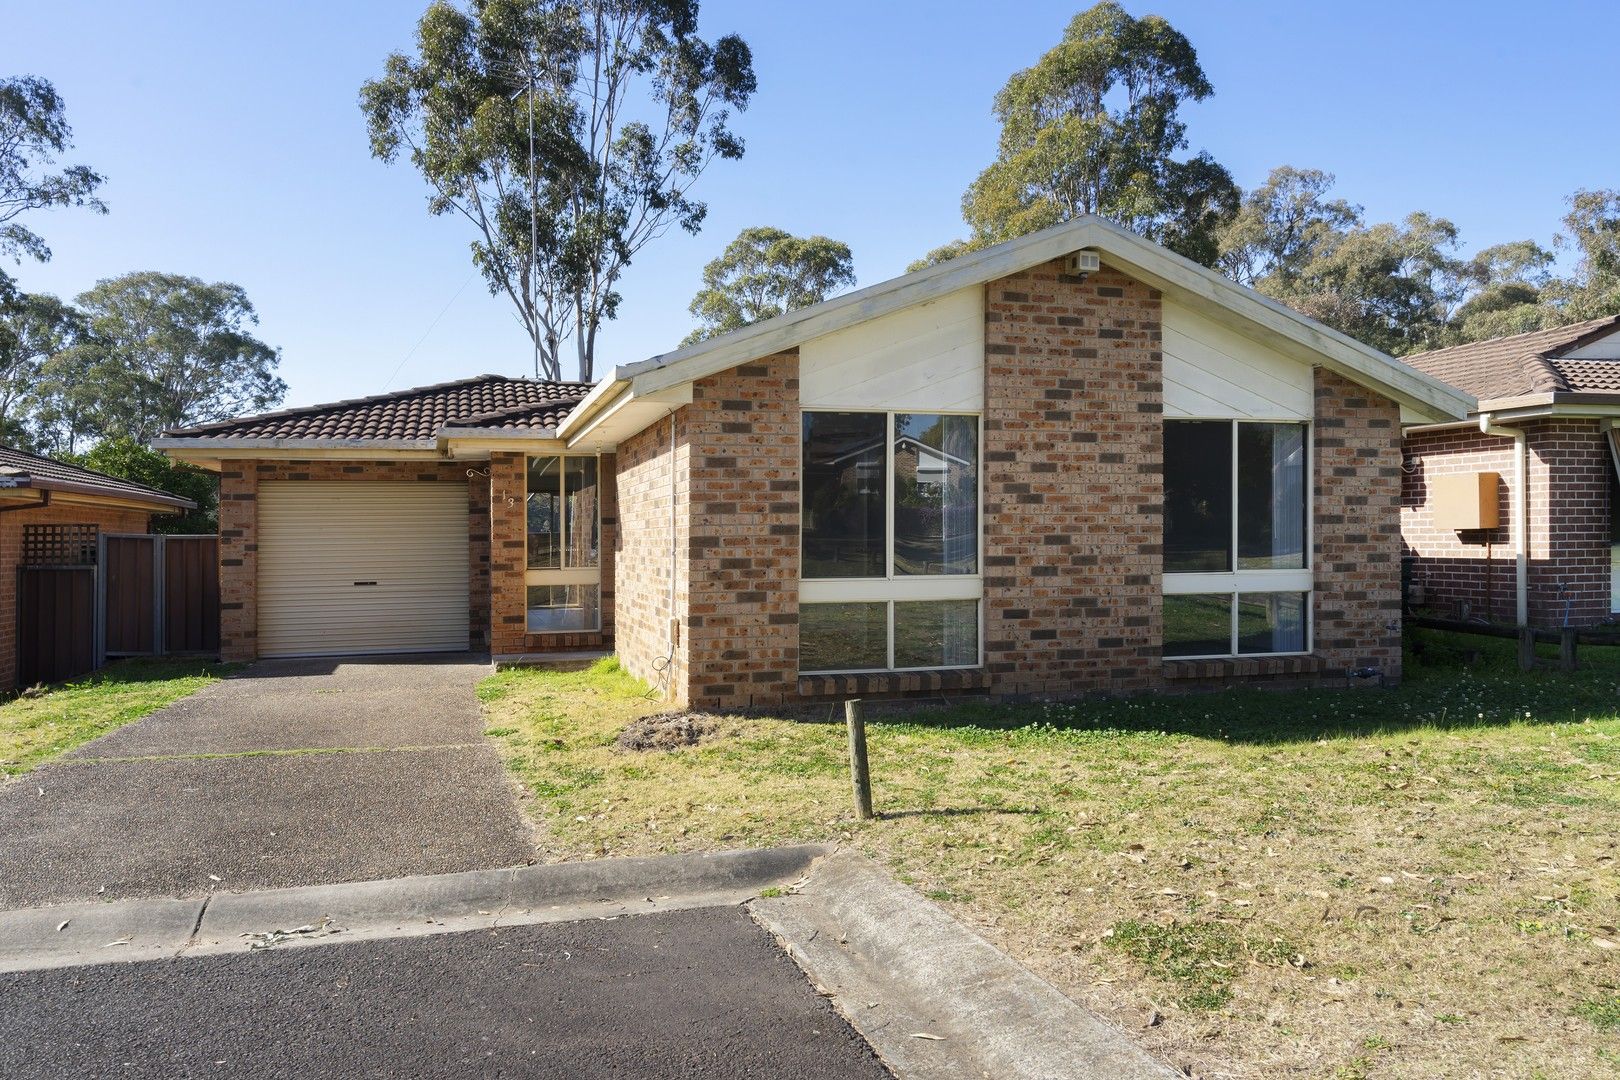 3 bedrooms House in 13/31 Perigee Close DOONSIDE NSW, 2767